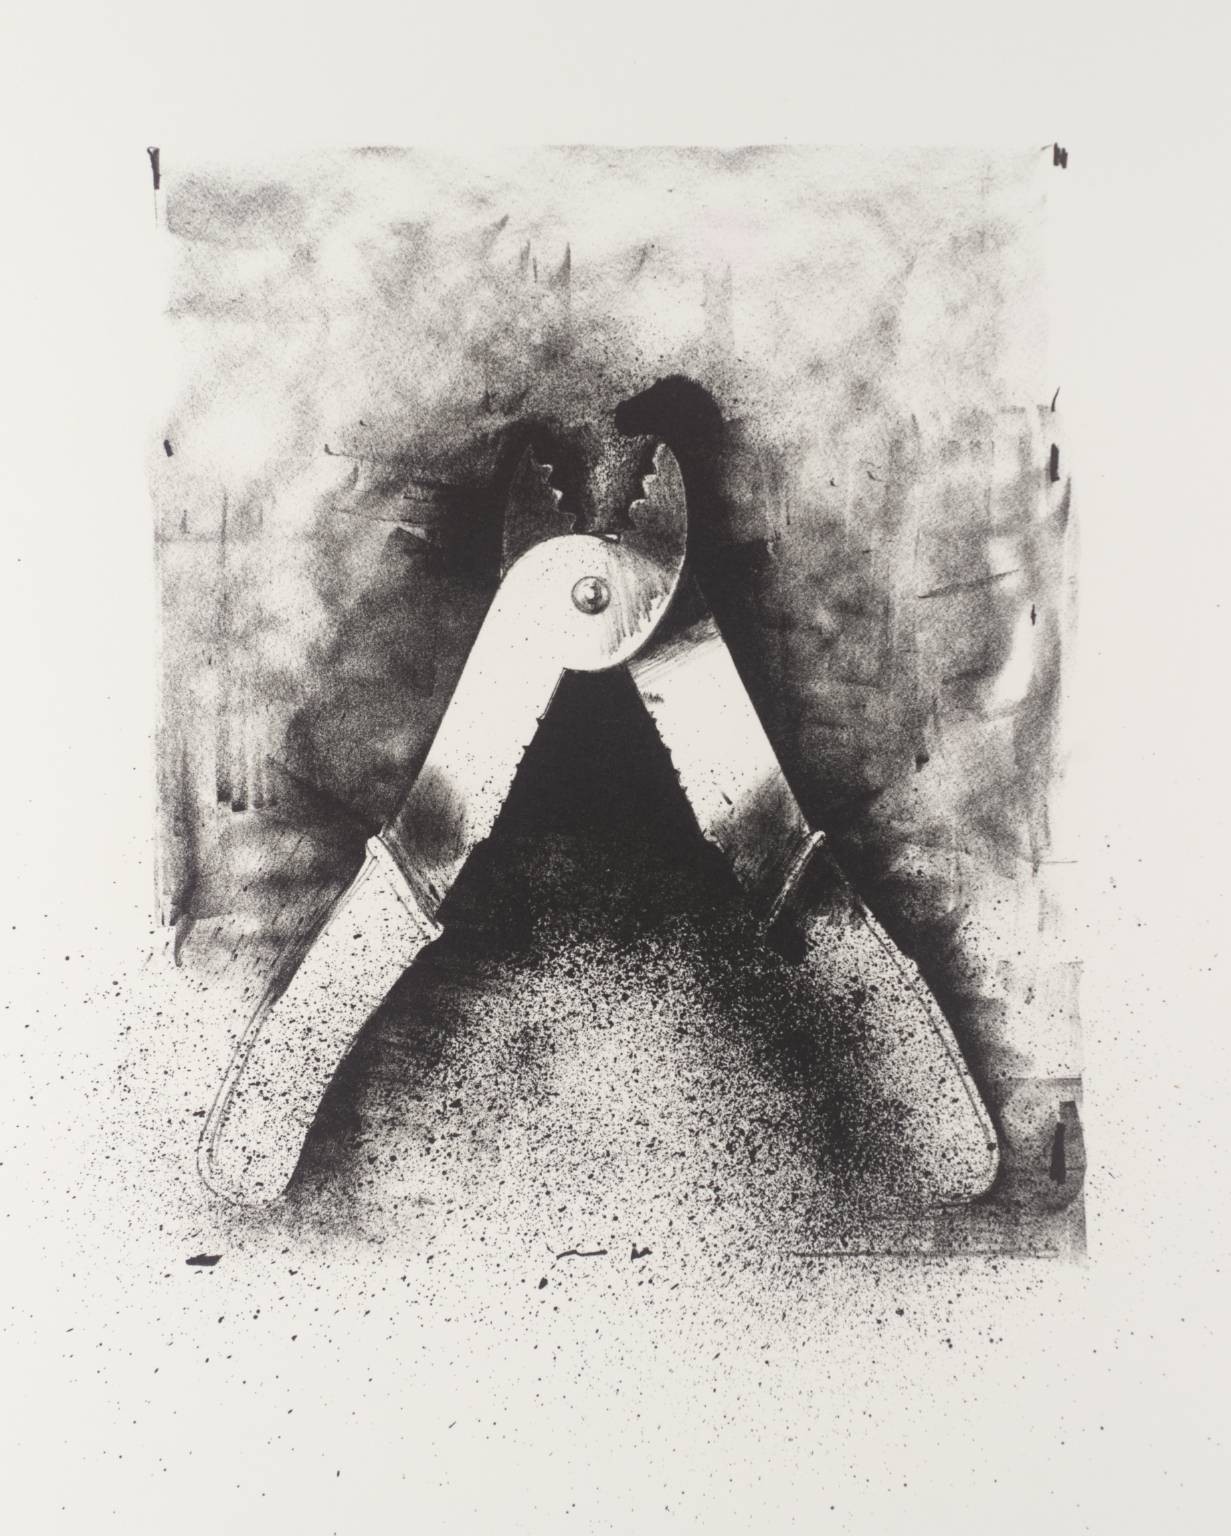 [no title] 1973 Jim Dine born 1935 Presented by the artist 1980 http://www.tate.org.uk/art/work/P02540